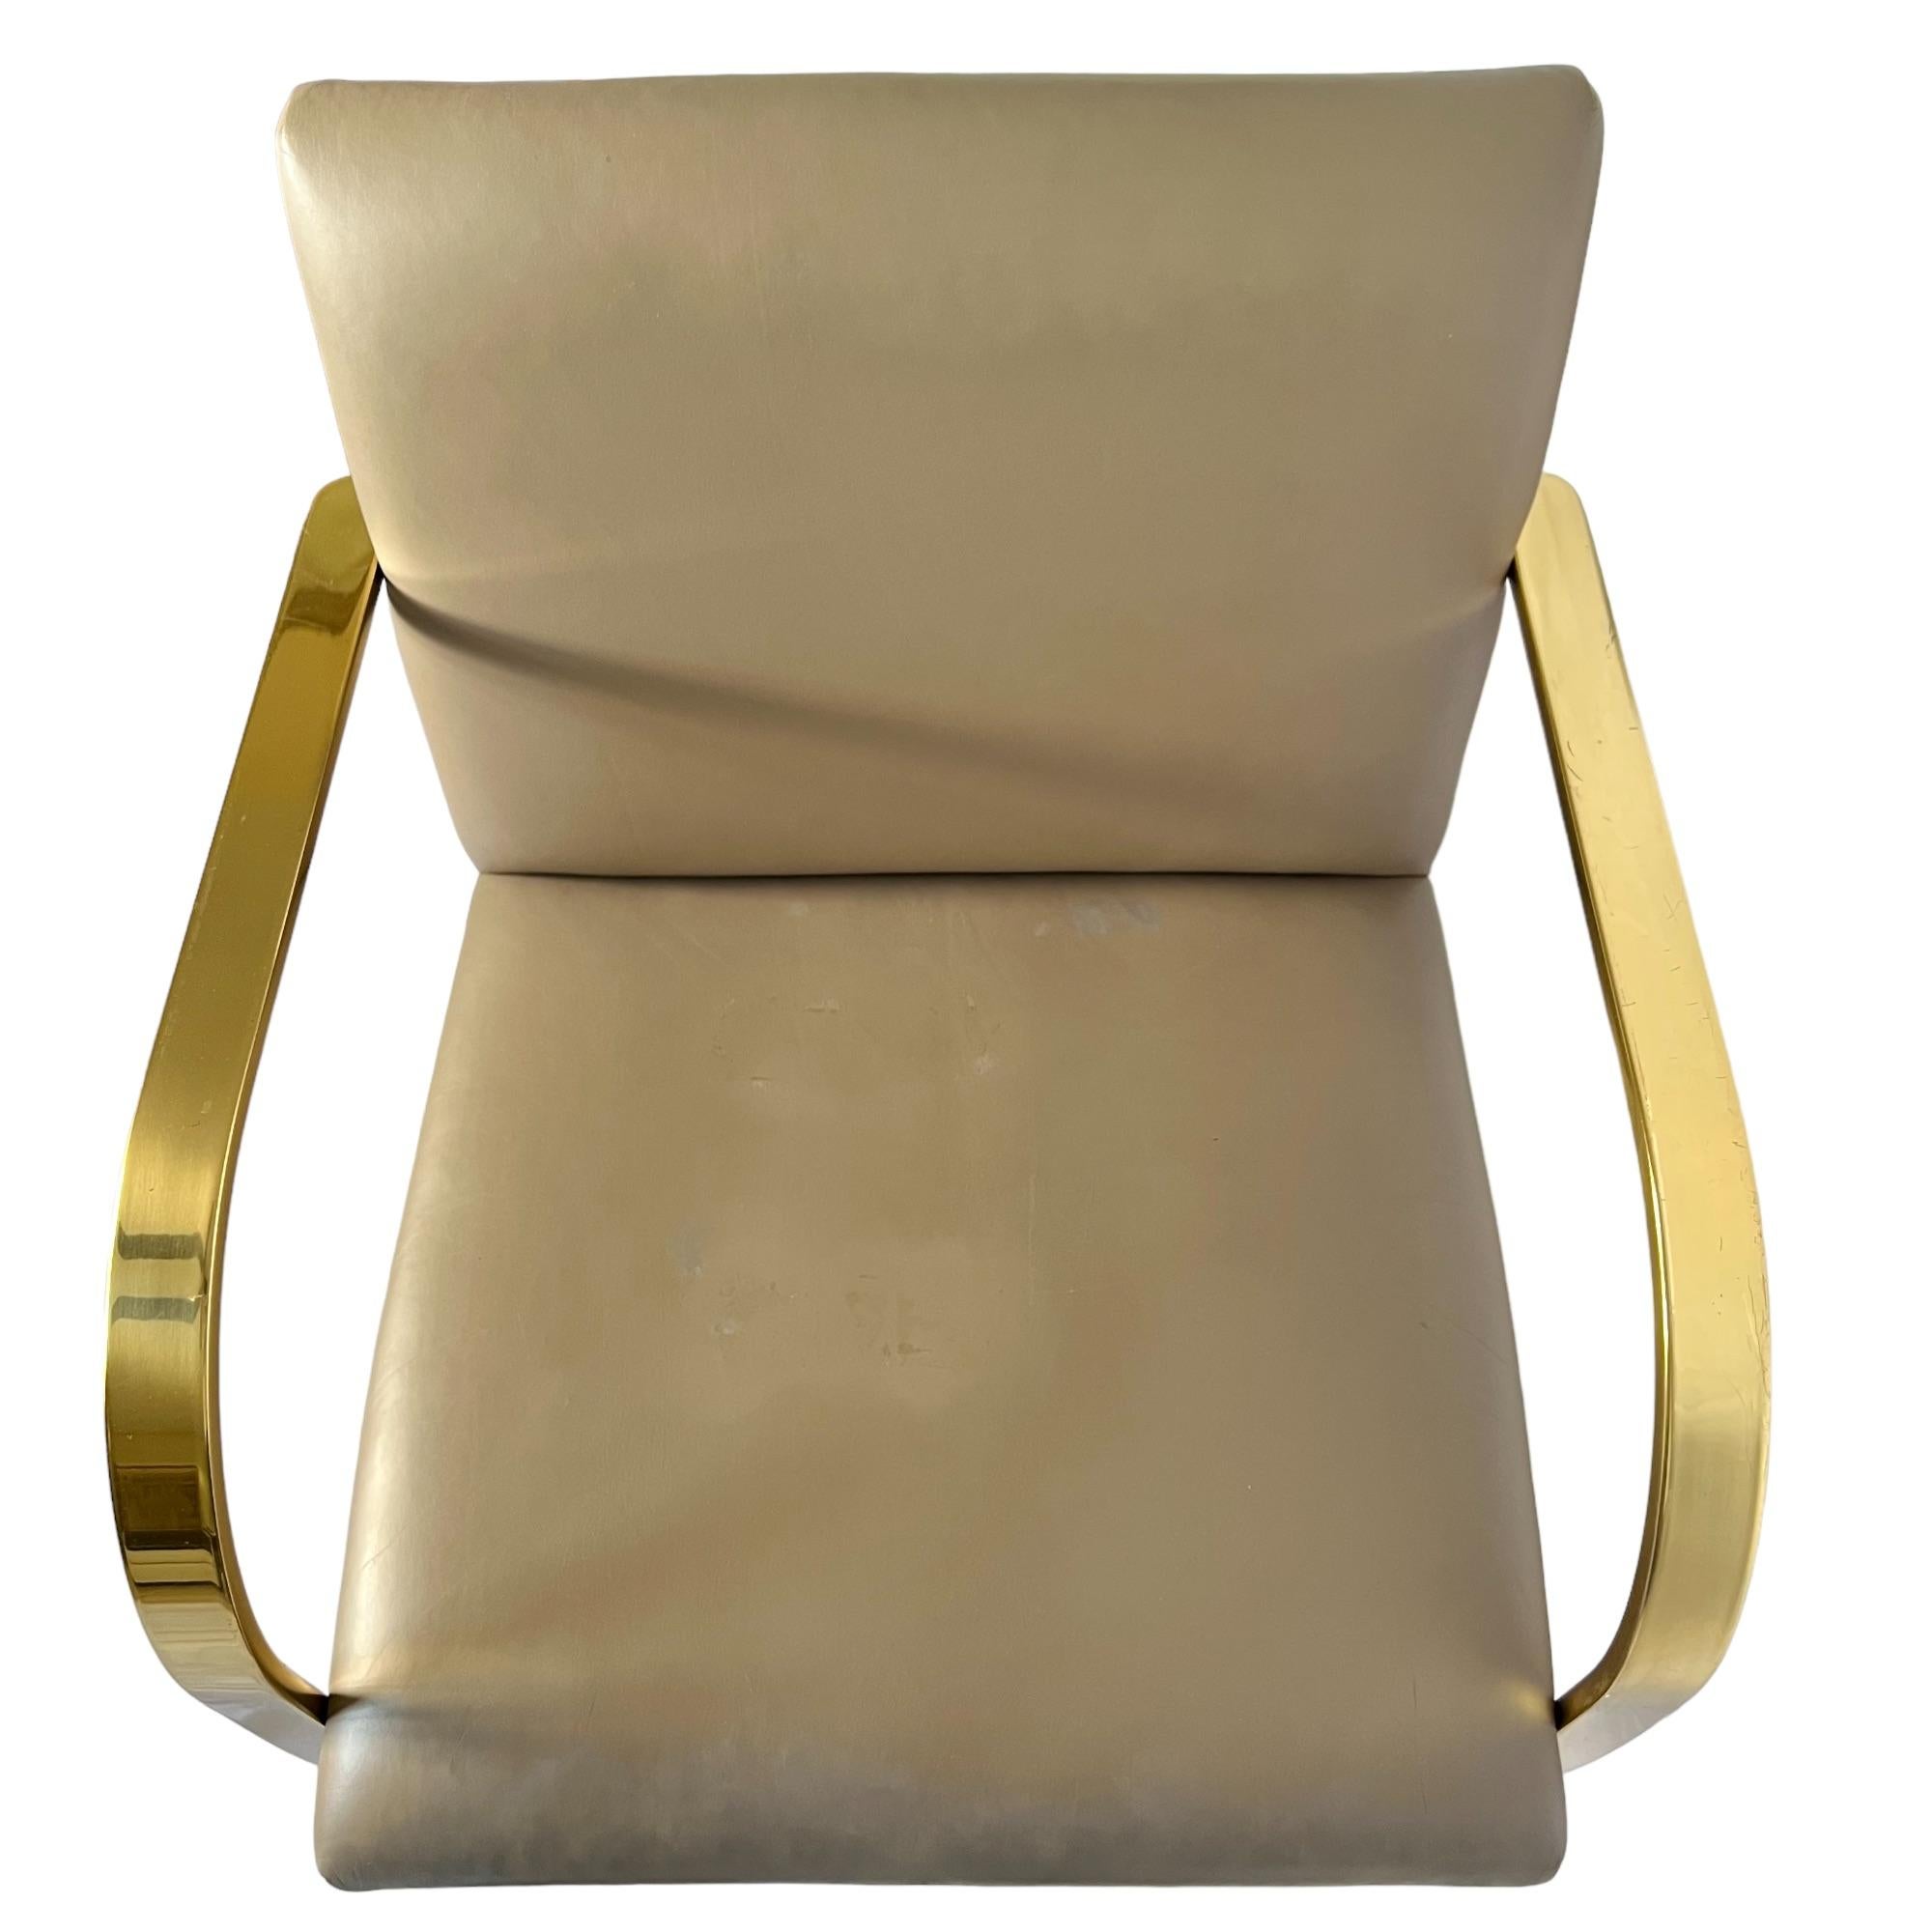 Mies Van Der Rohe Brno Gold Brass Flat Bar Leather Chairs, a Pair For Sale 2